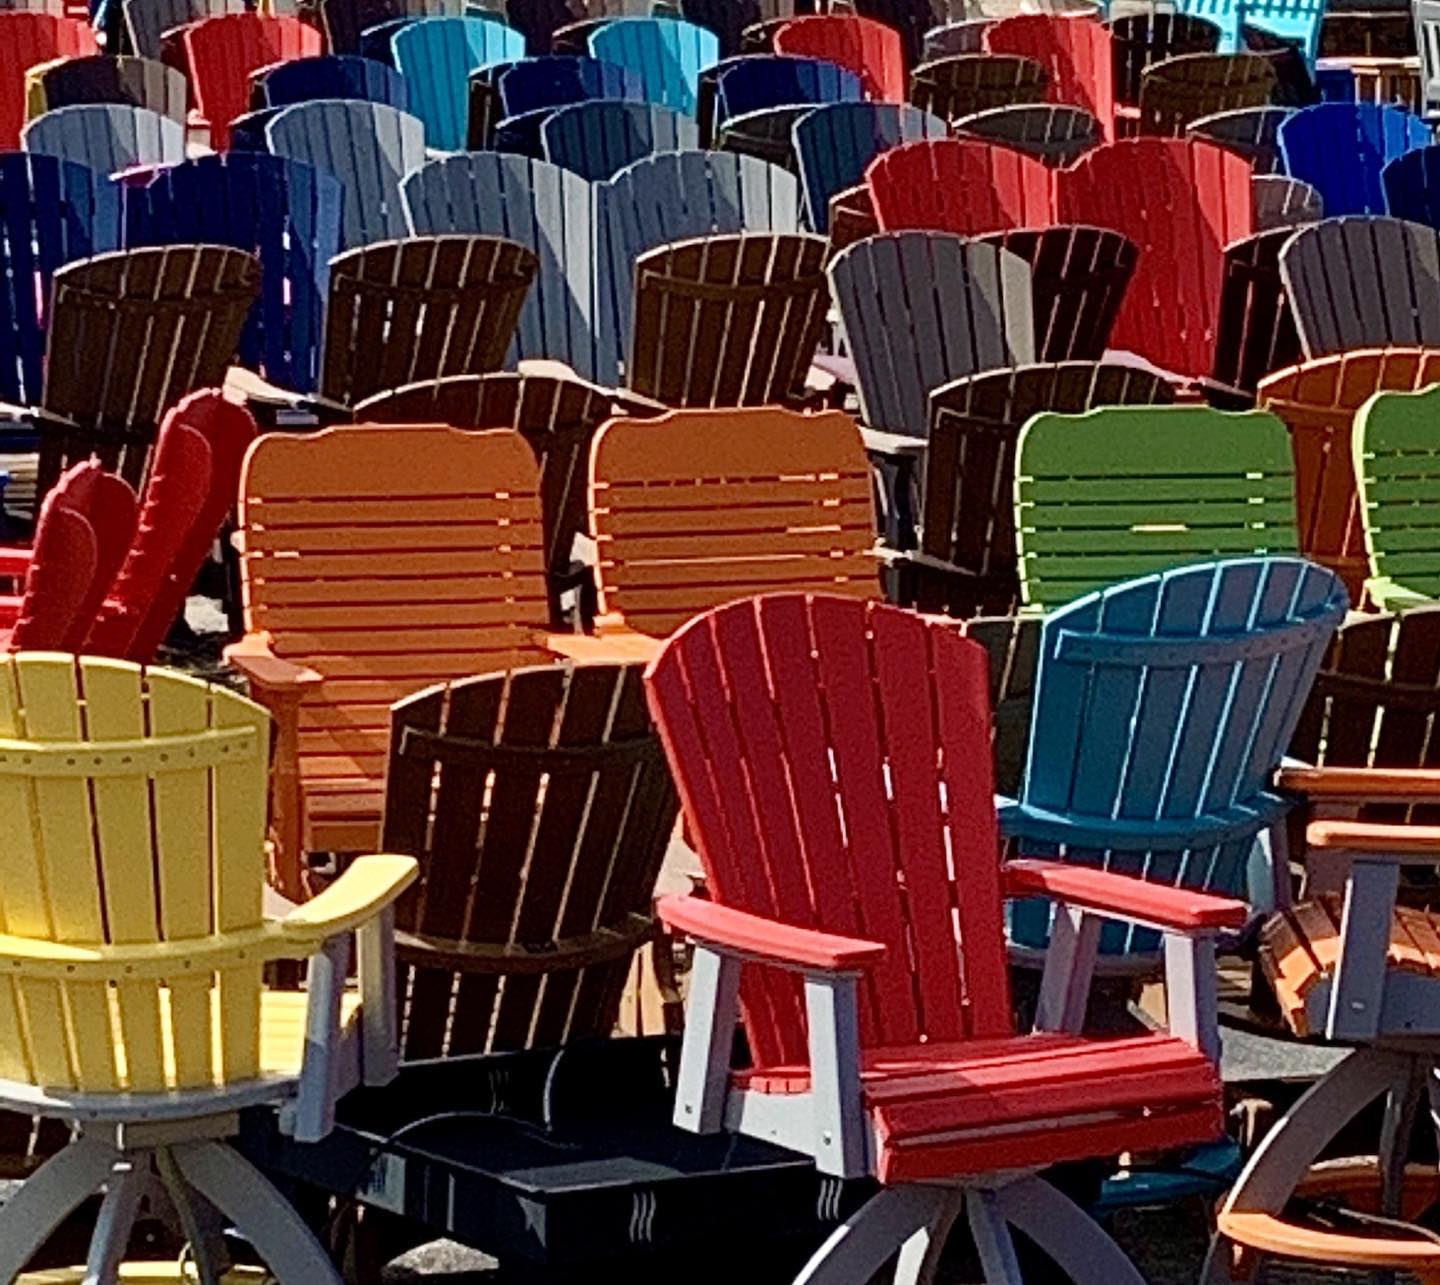 Anticipating a busy outdoor season in the weeks ahead in Poncha Springs, Colorado. #ponchaspringscolorado #orcuttphotography.com #colorfullawnchairs #coloradocolor